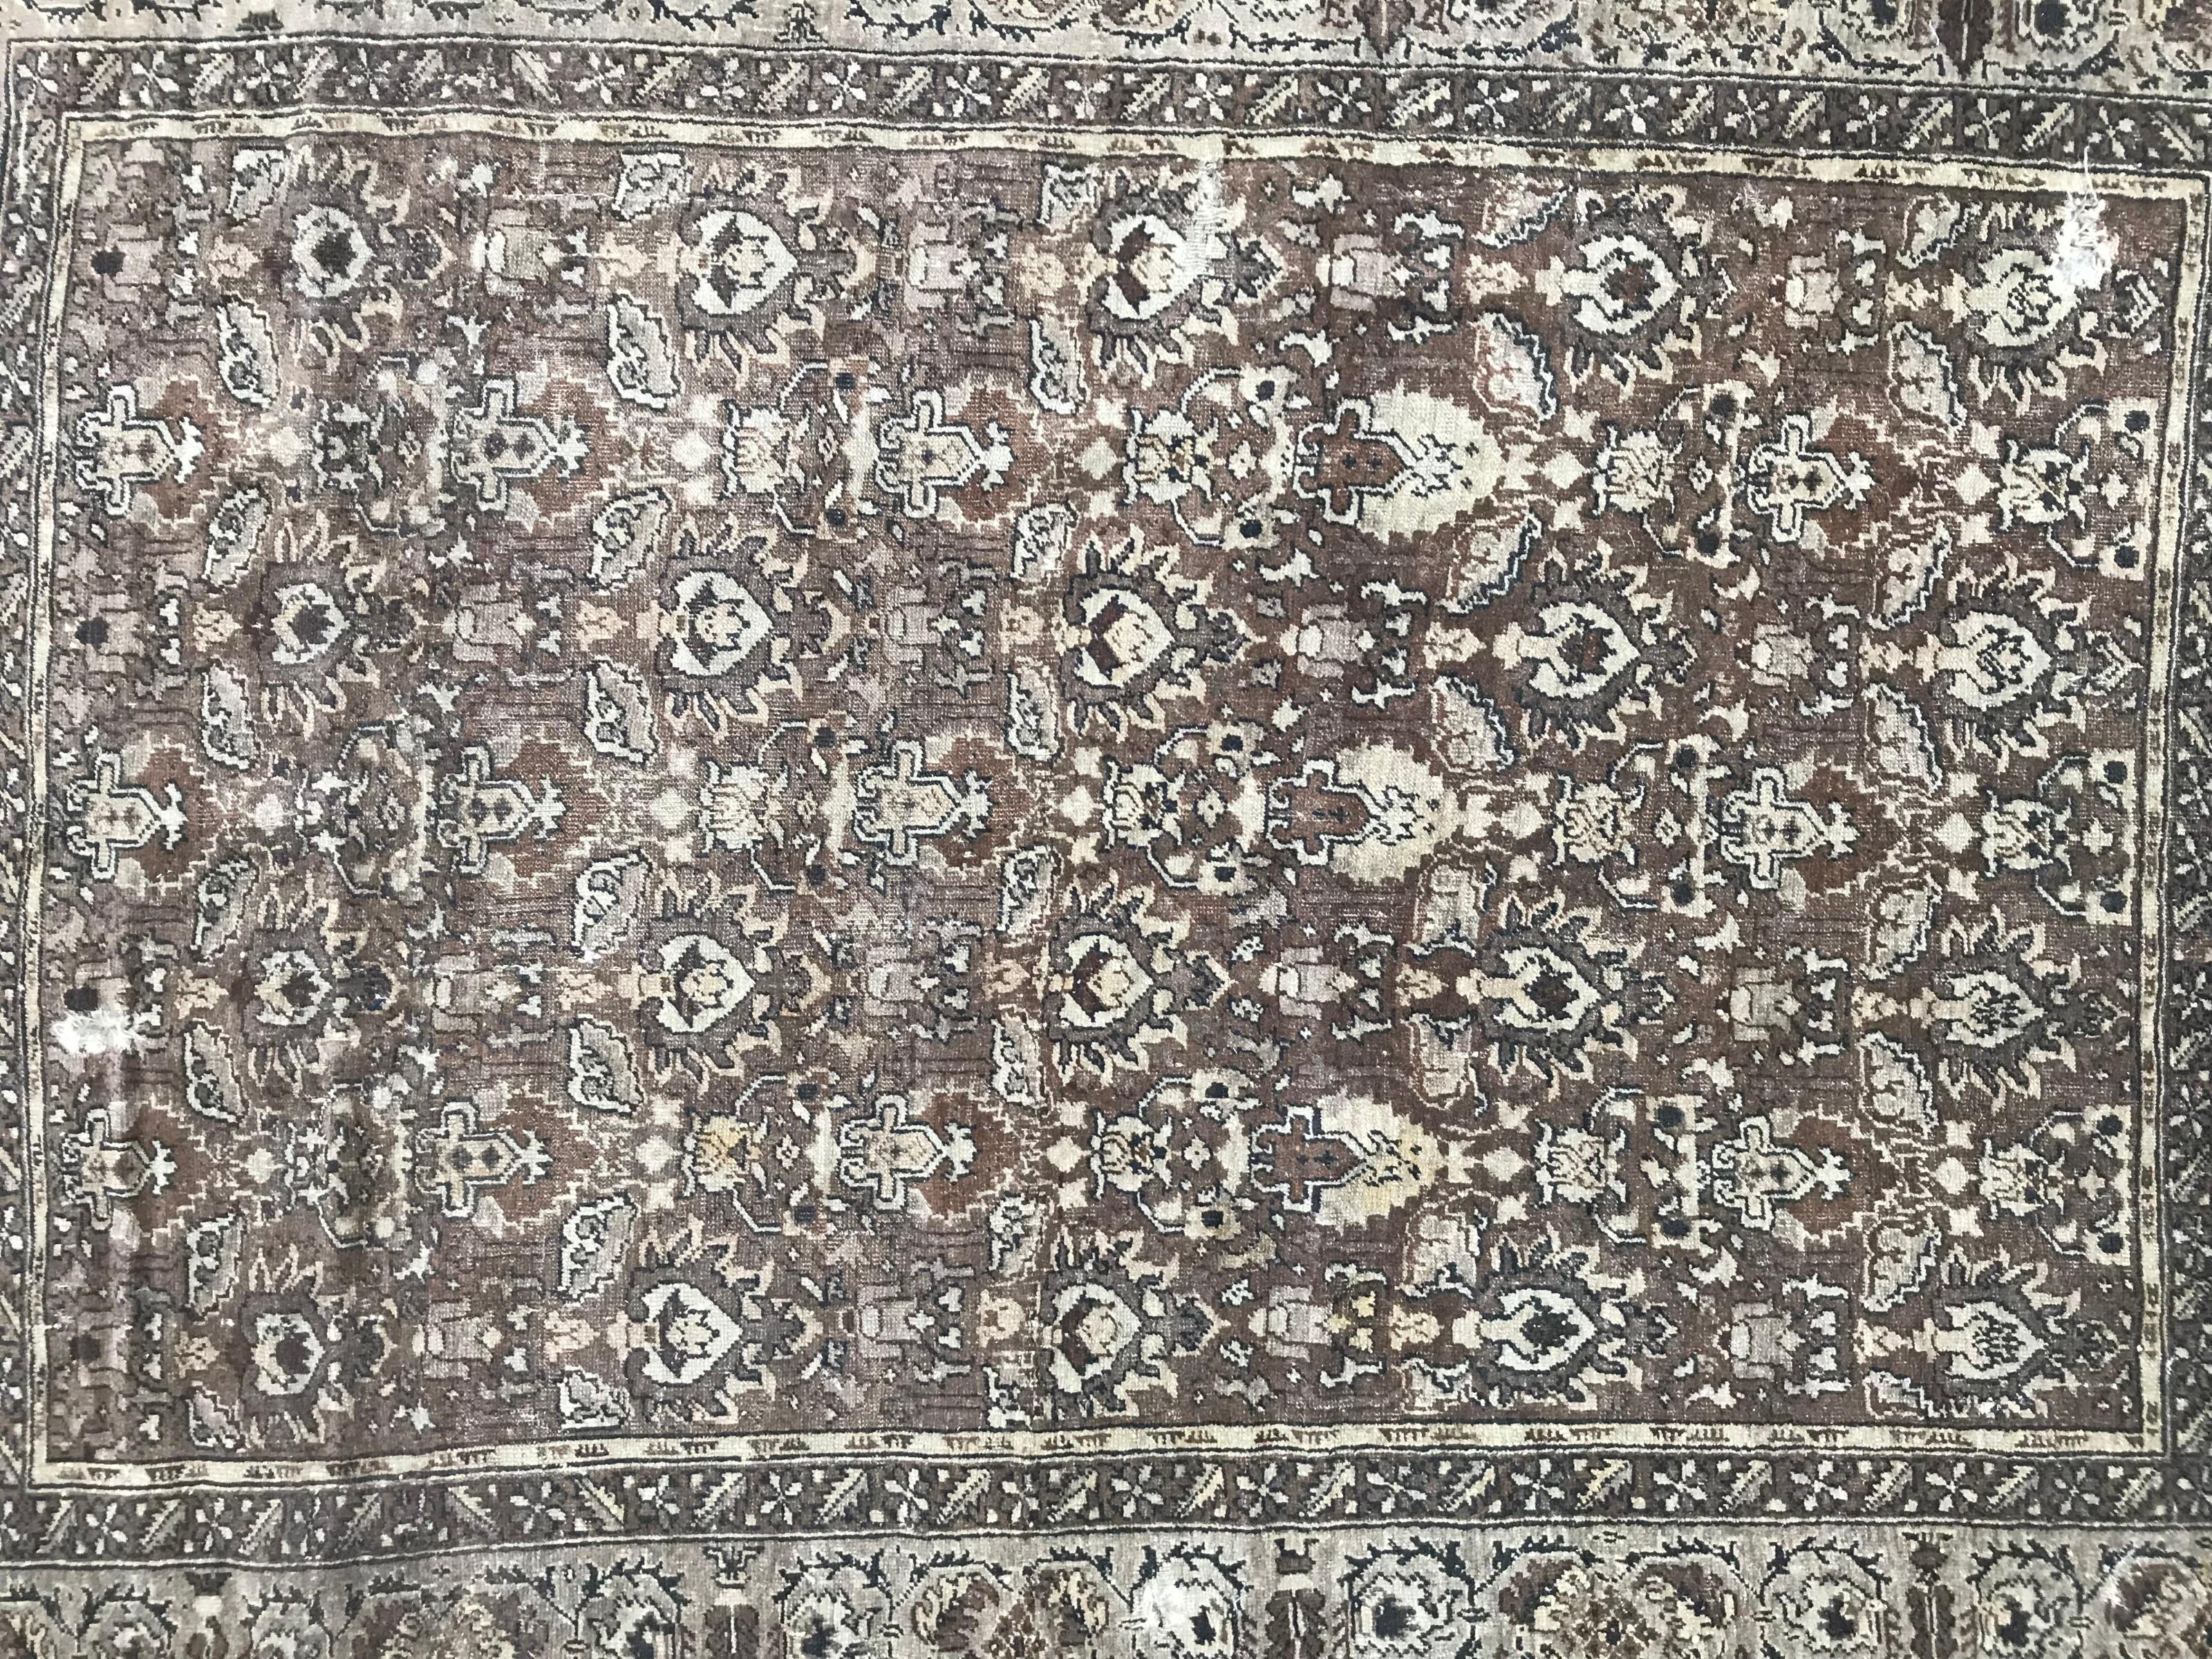 Early 20th century Turkish rug with Armenian scriptures at an extremity side and beautiful decorative design, with grey and brown colors, entirely hand knotted with wool velvet on wool foundation.